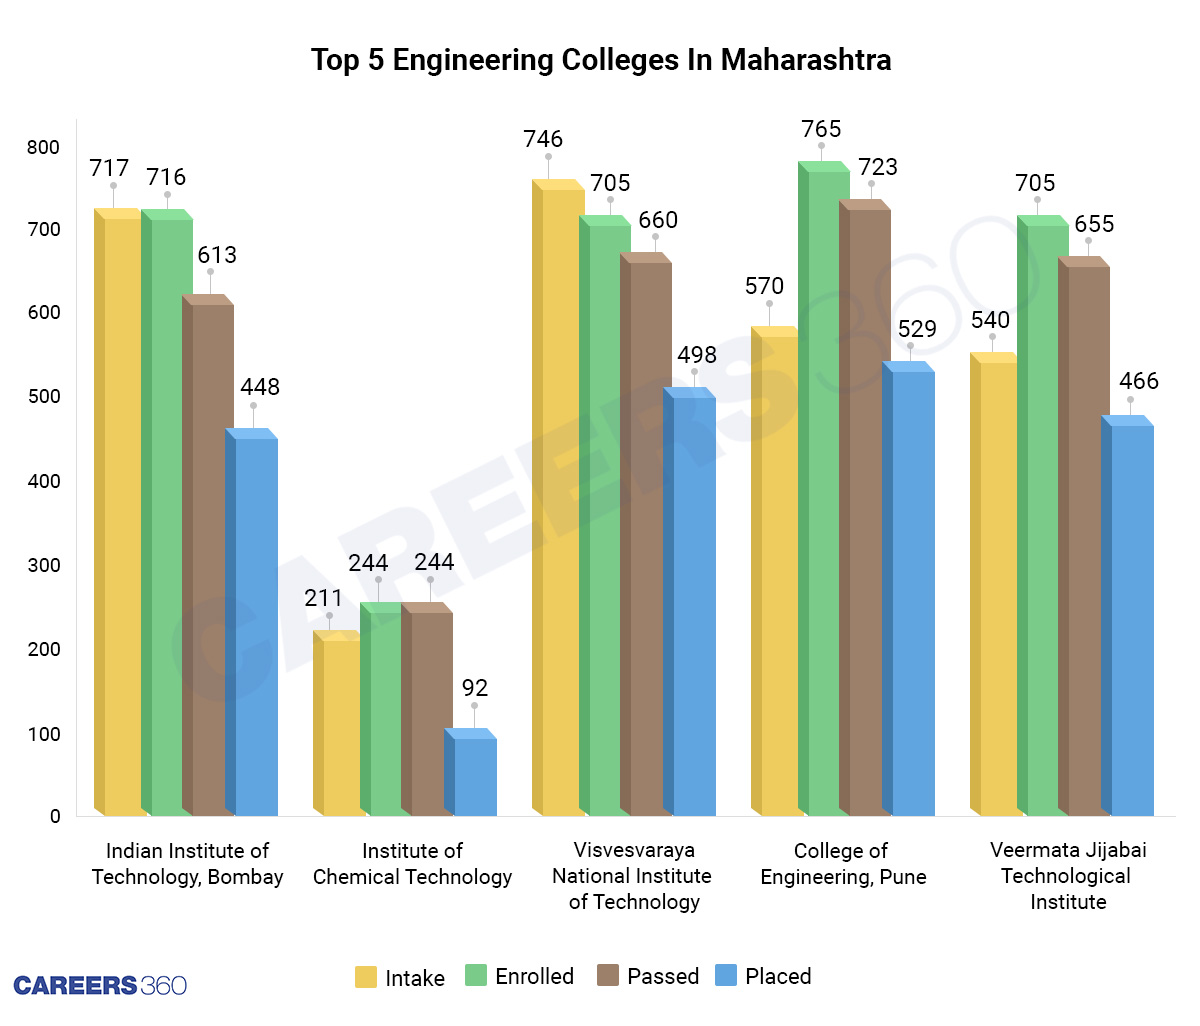 Top engineering colleges in Maharashtra placement performance of top 5 colleges of Maharashtra